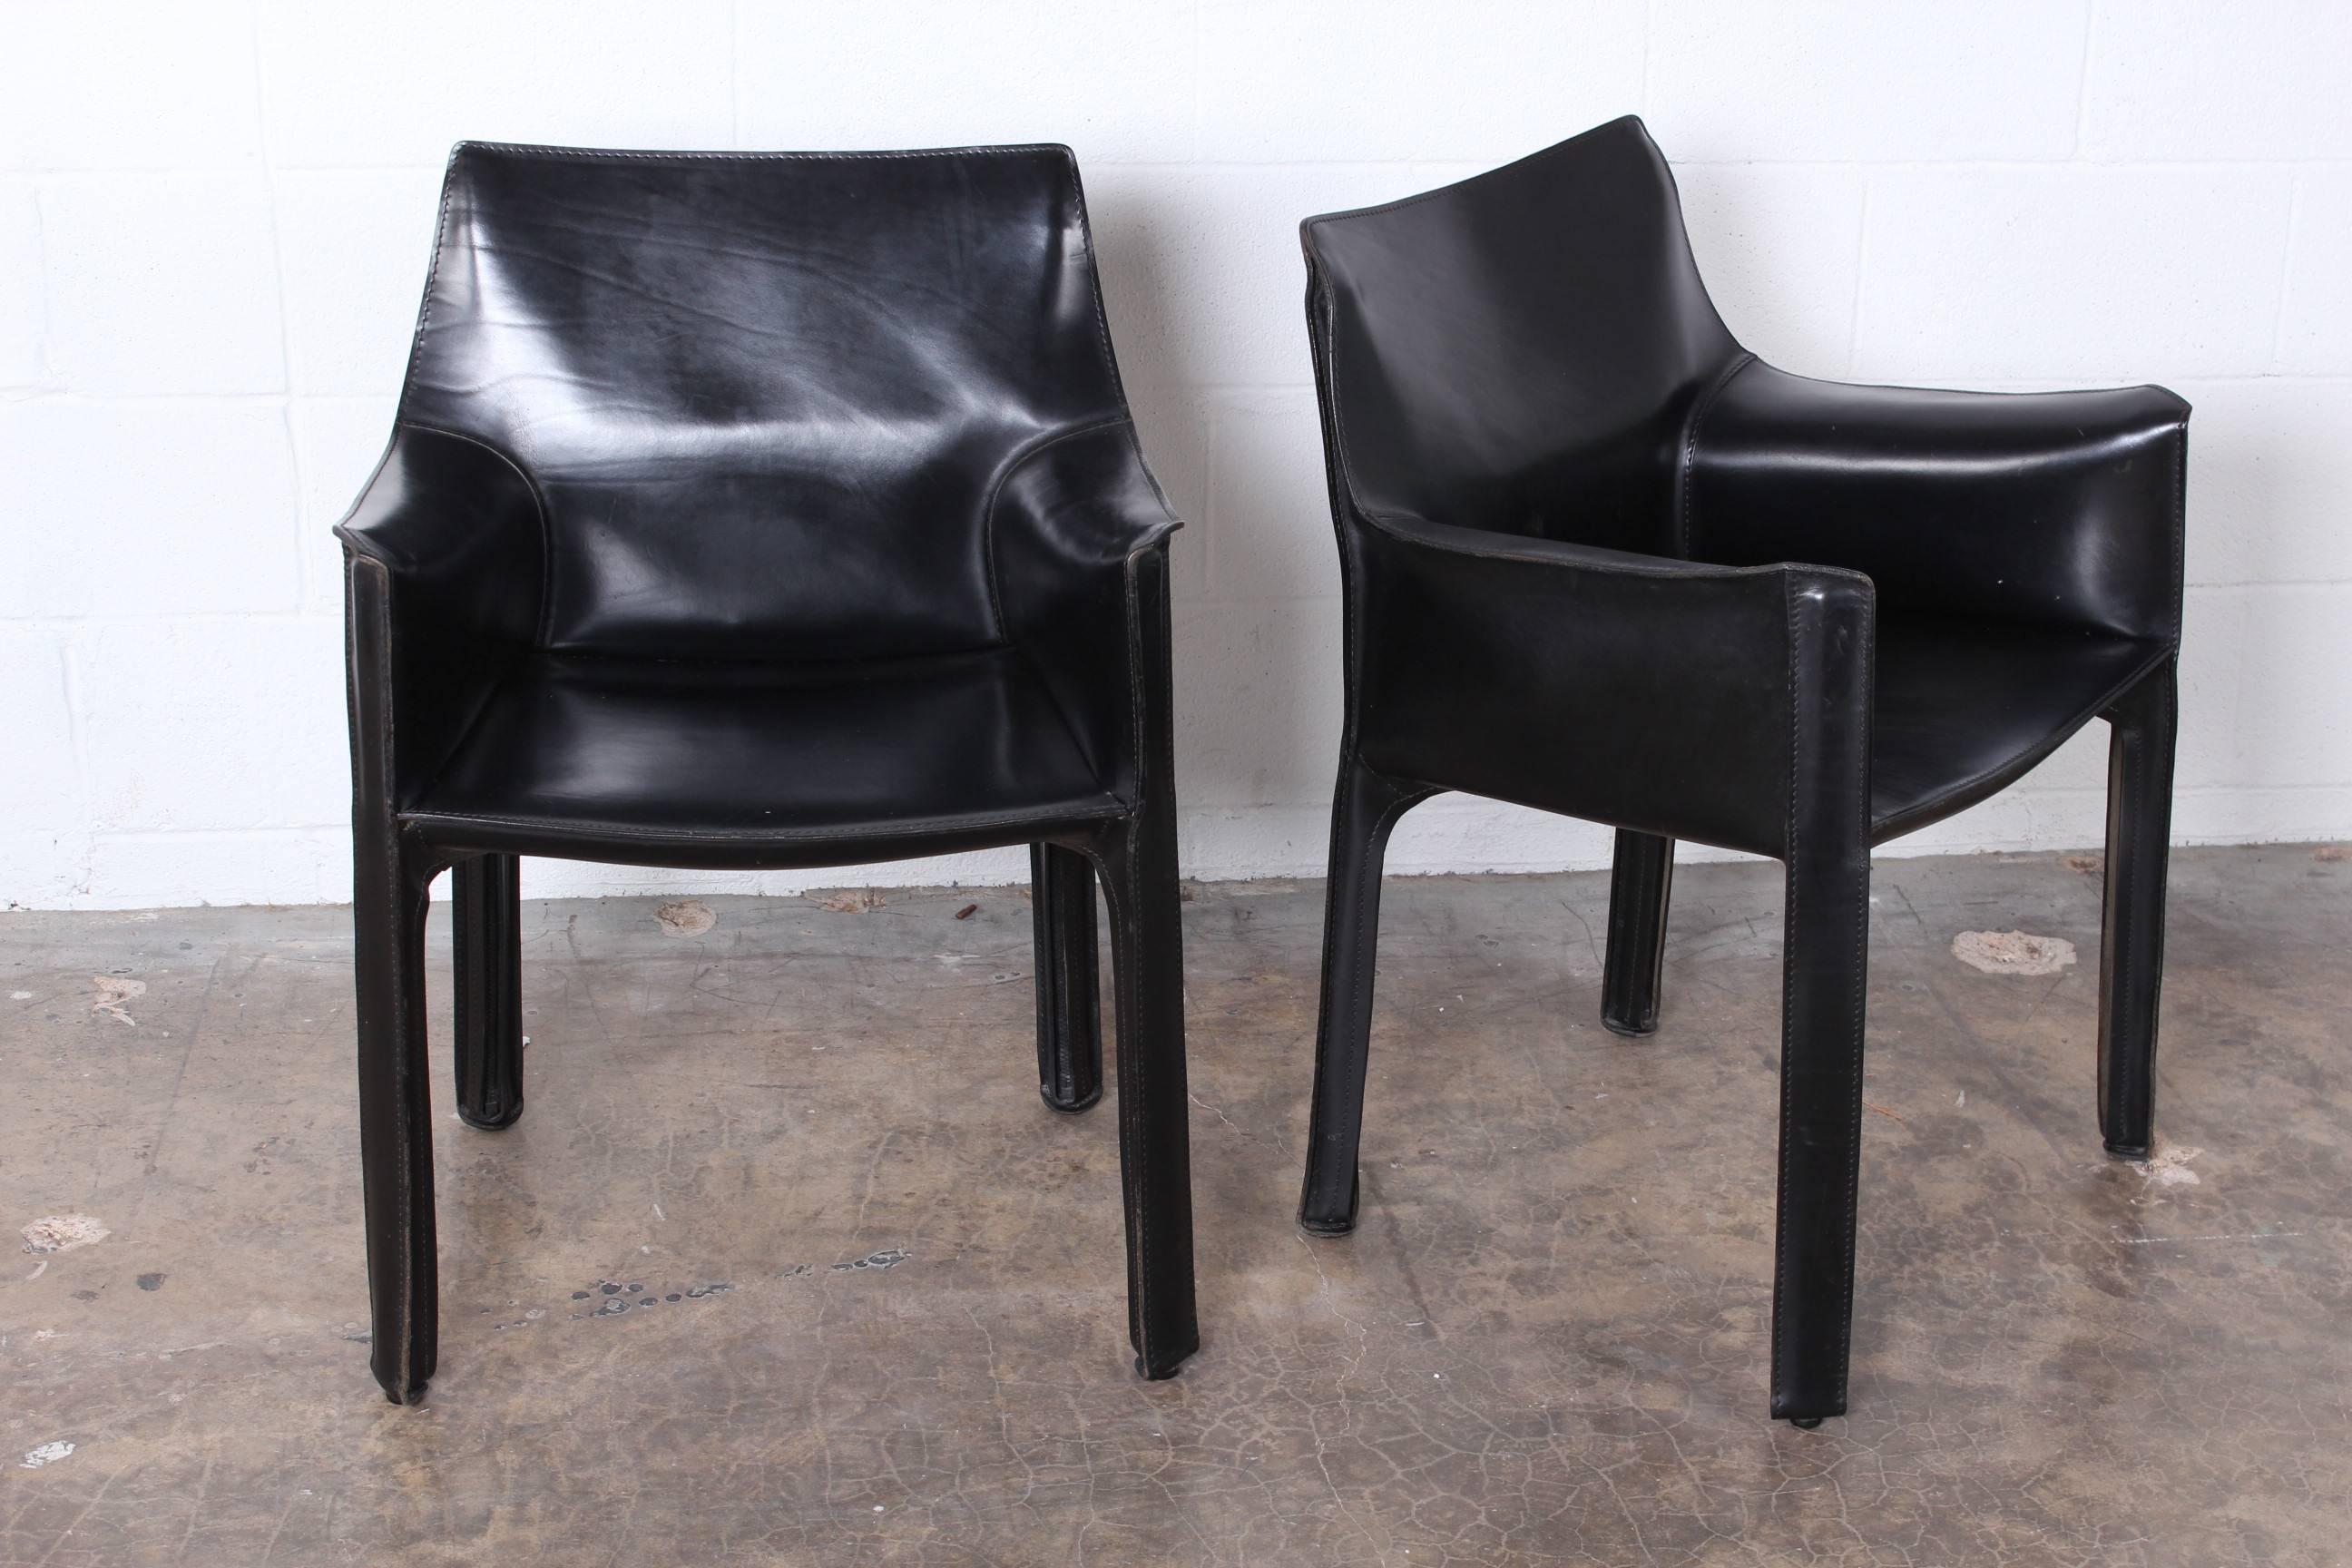 Pair of Black Cab Armchairs by Mario Bellini for Cassina 1